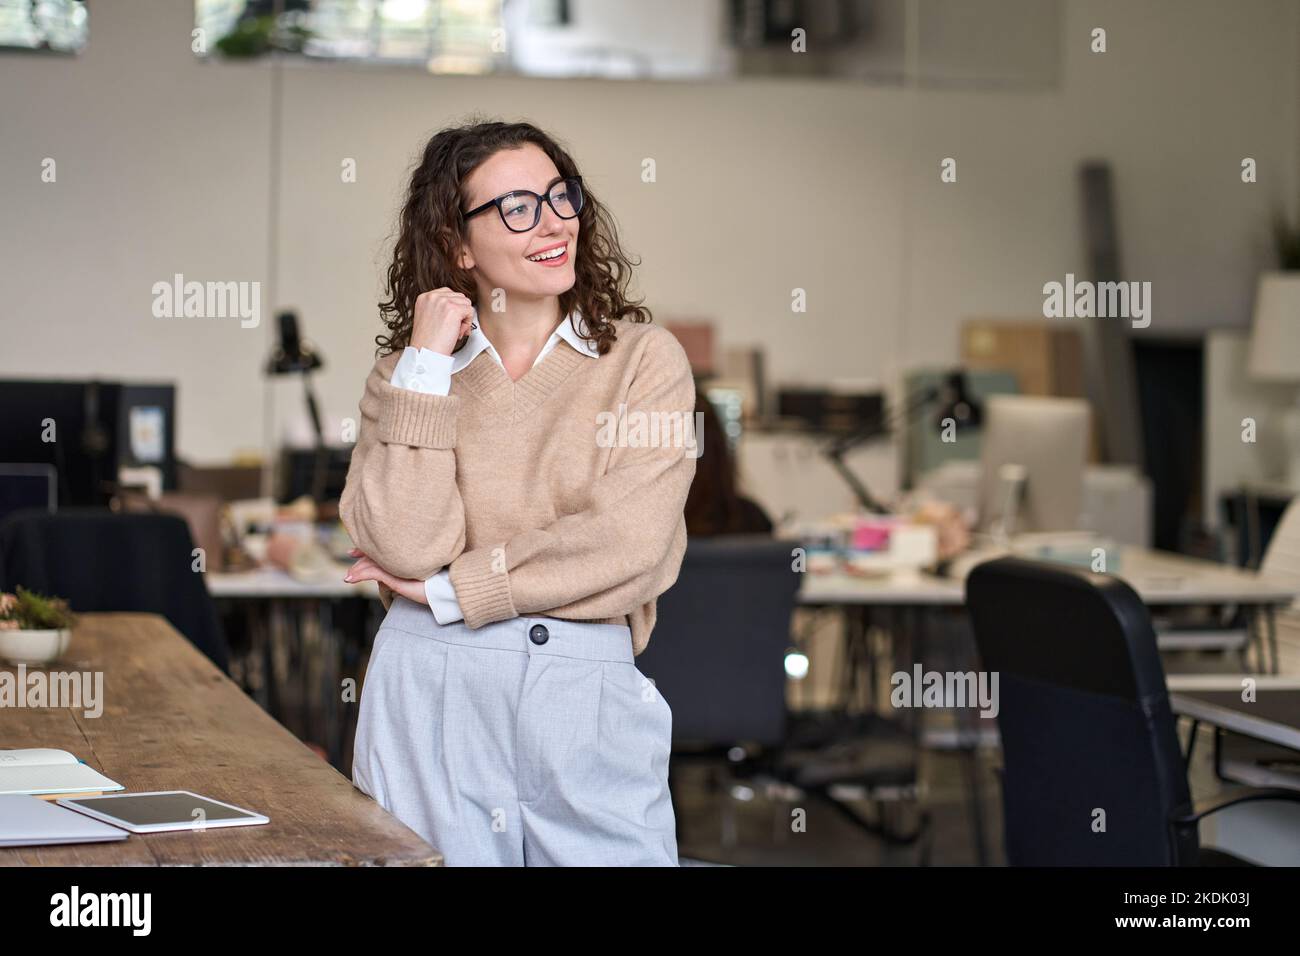 Young positive happy professional business woman standing in office. Stock Photo